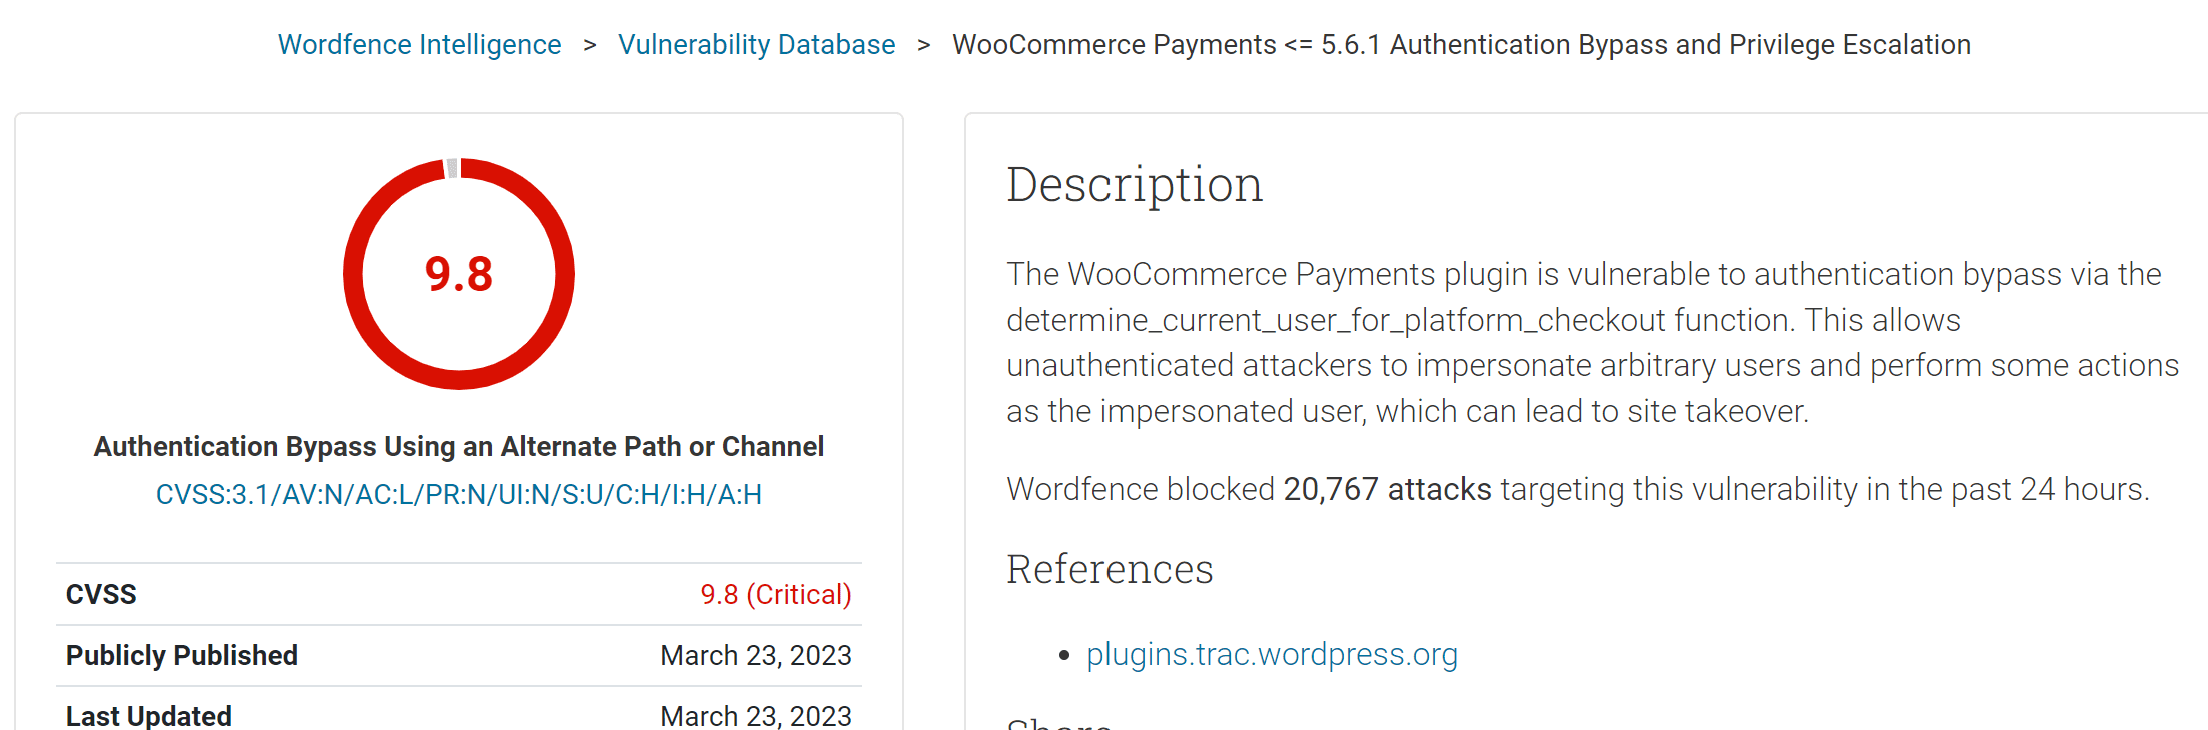 WooCommerce Payments Vulnerability